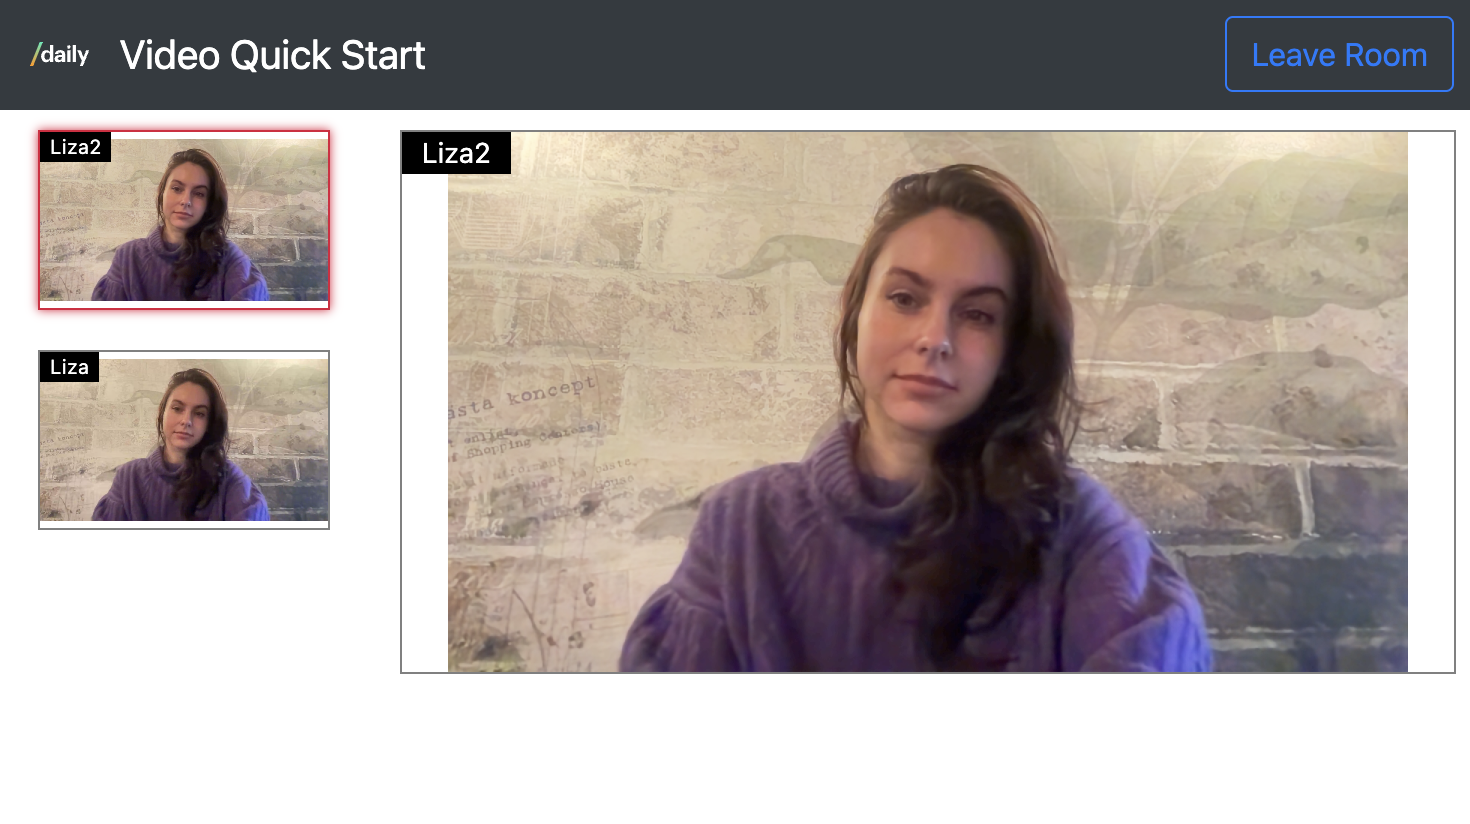 Video application showing two participants in a video call